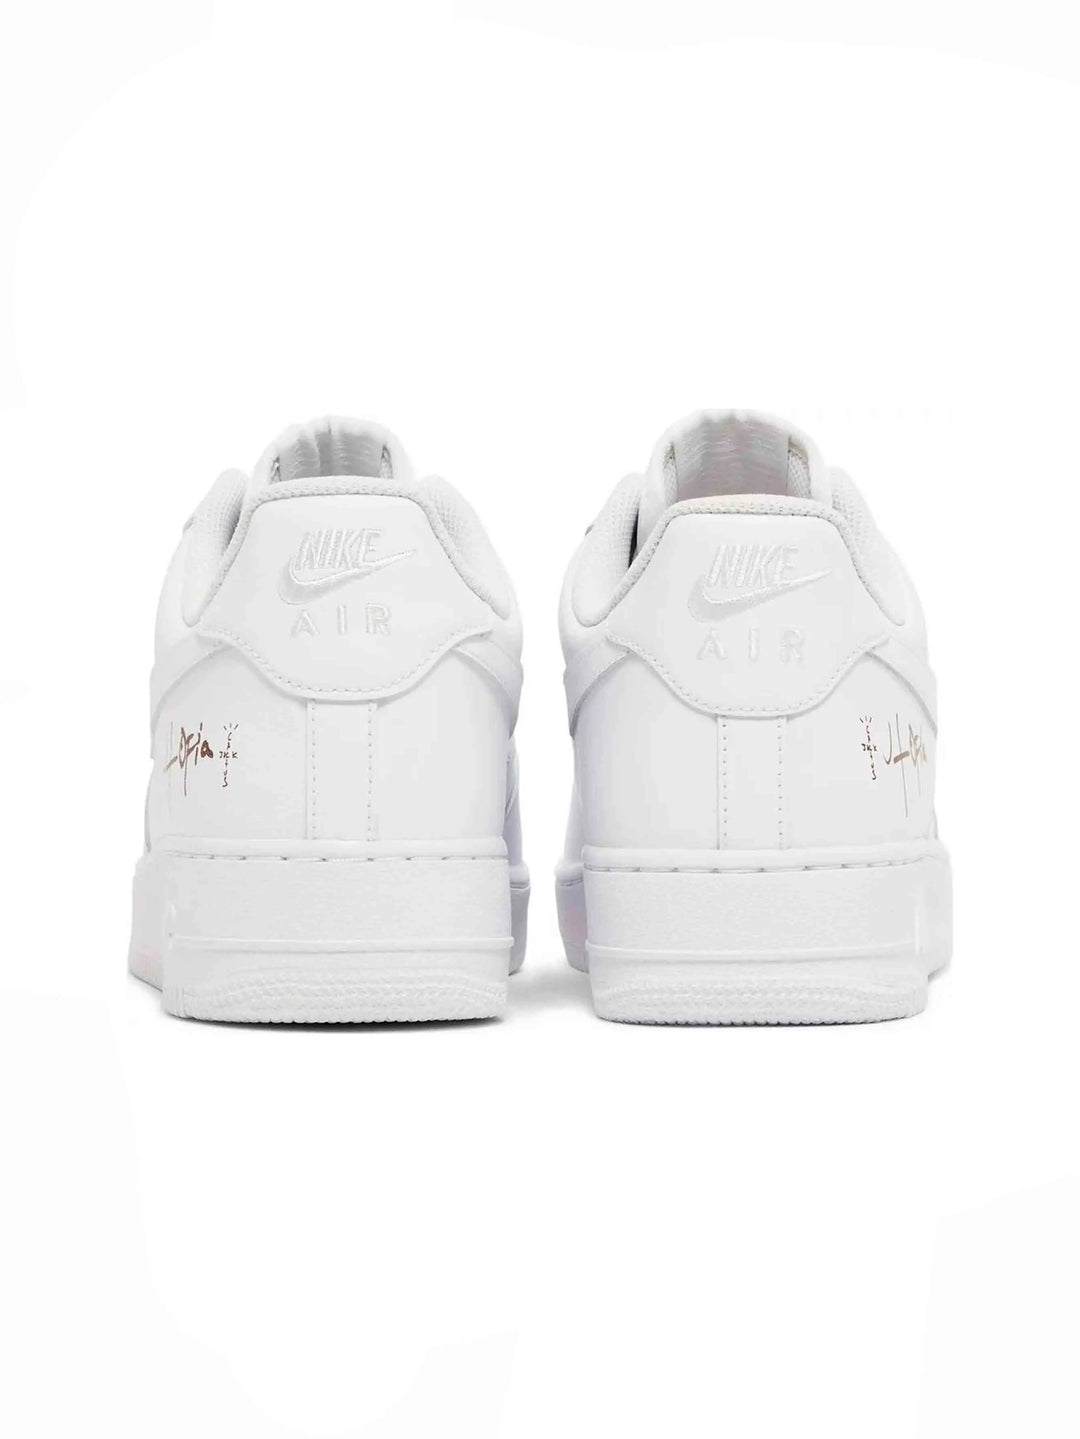 Nike Air Force 1 Low '07 White (Travis Scott Cactus Jack Utopia Edition) in Auckland, New Zealand - Shop name